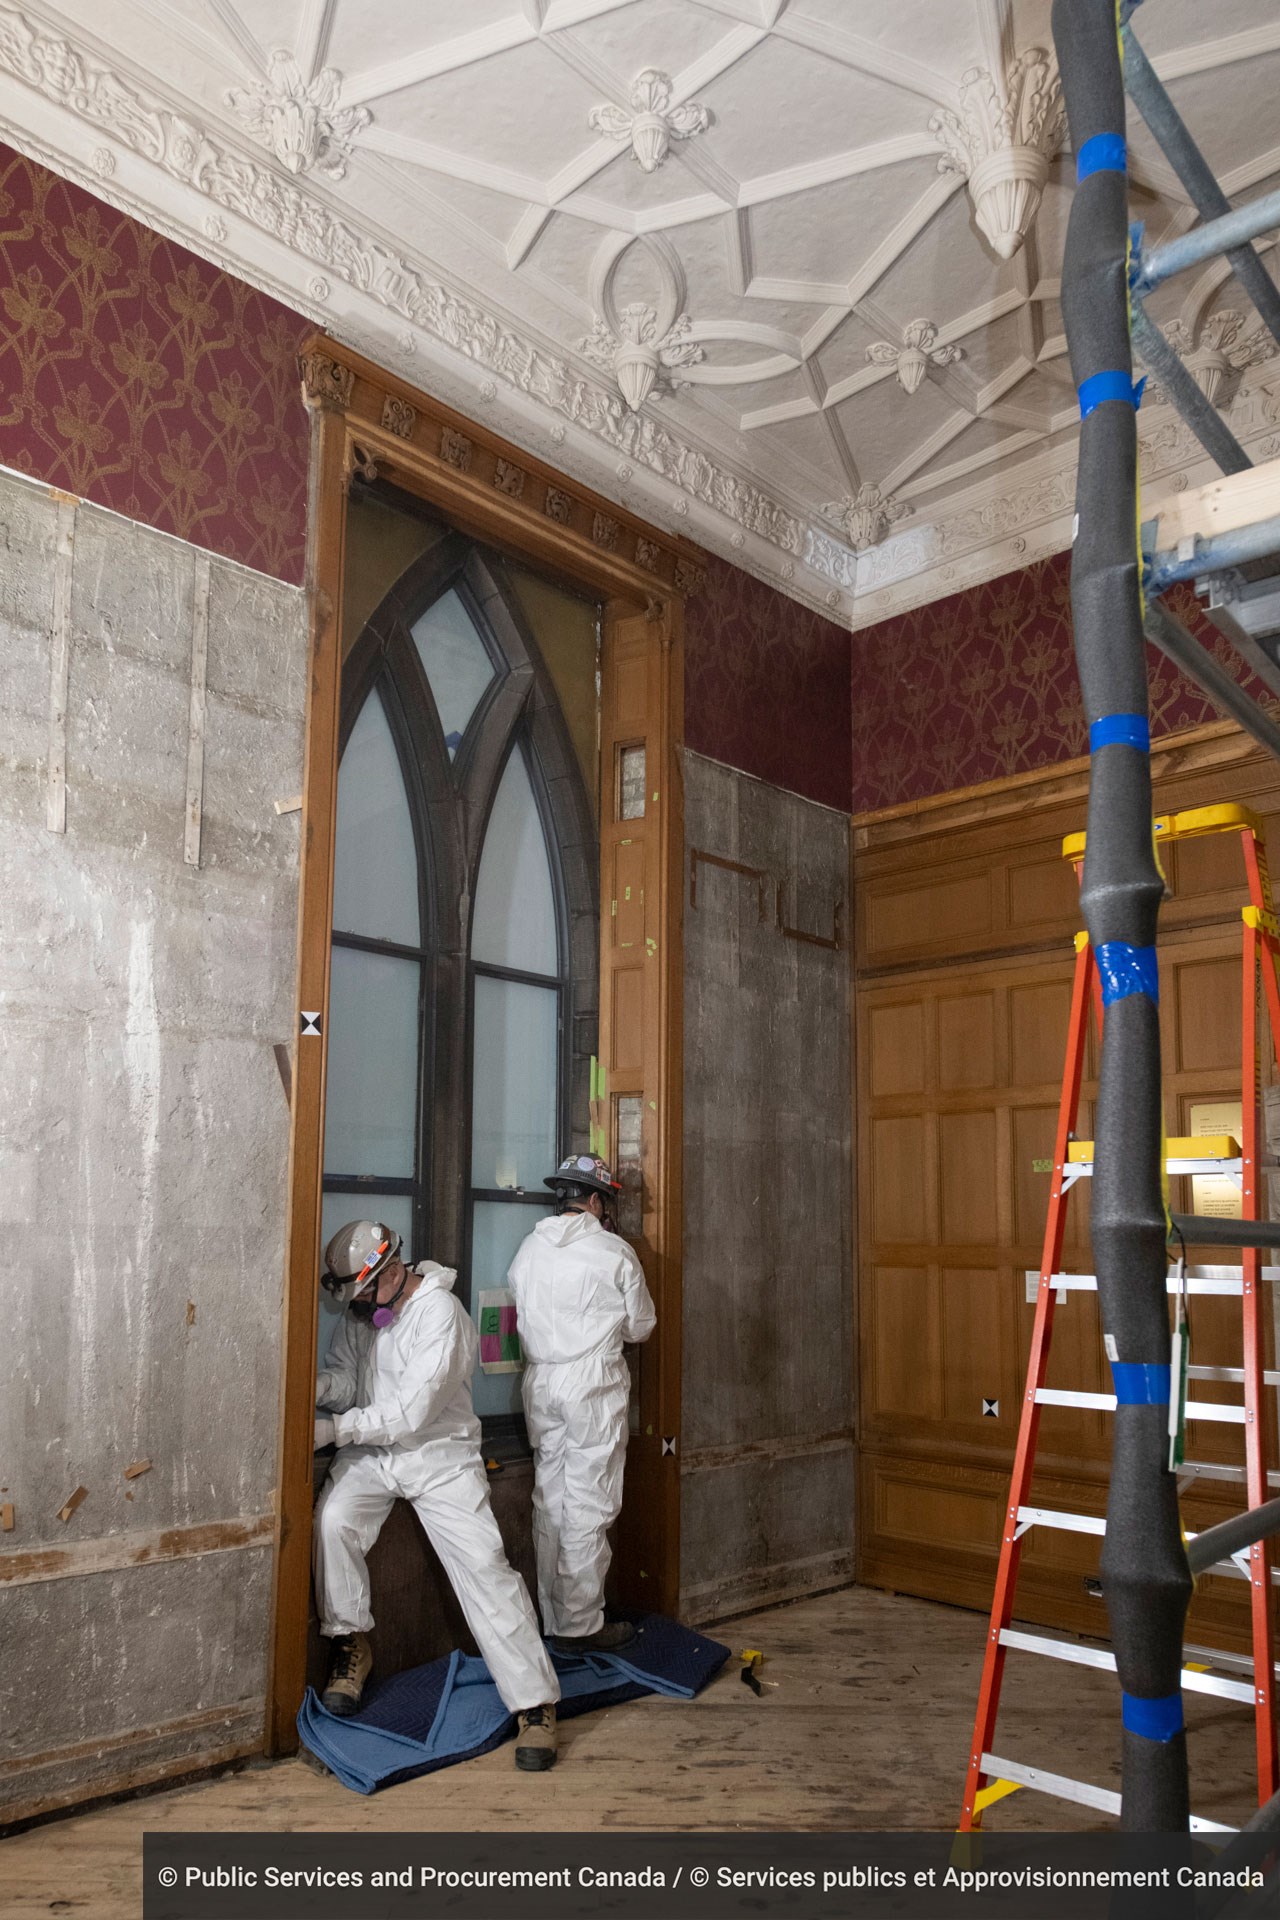 Carpenters remove wood panels from a window surround in the Senate Reading Room.